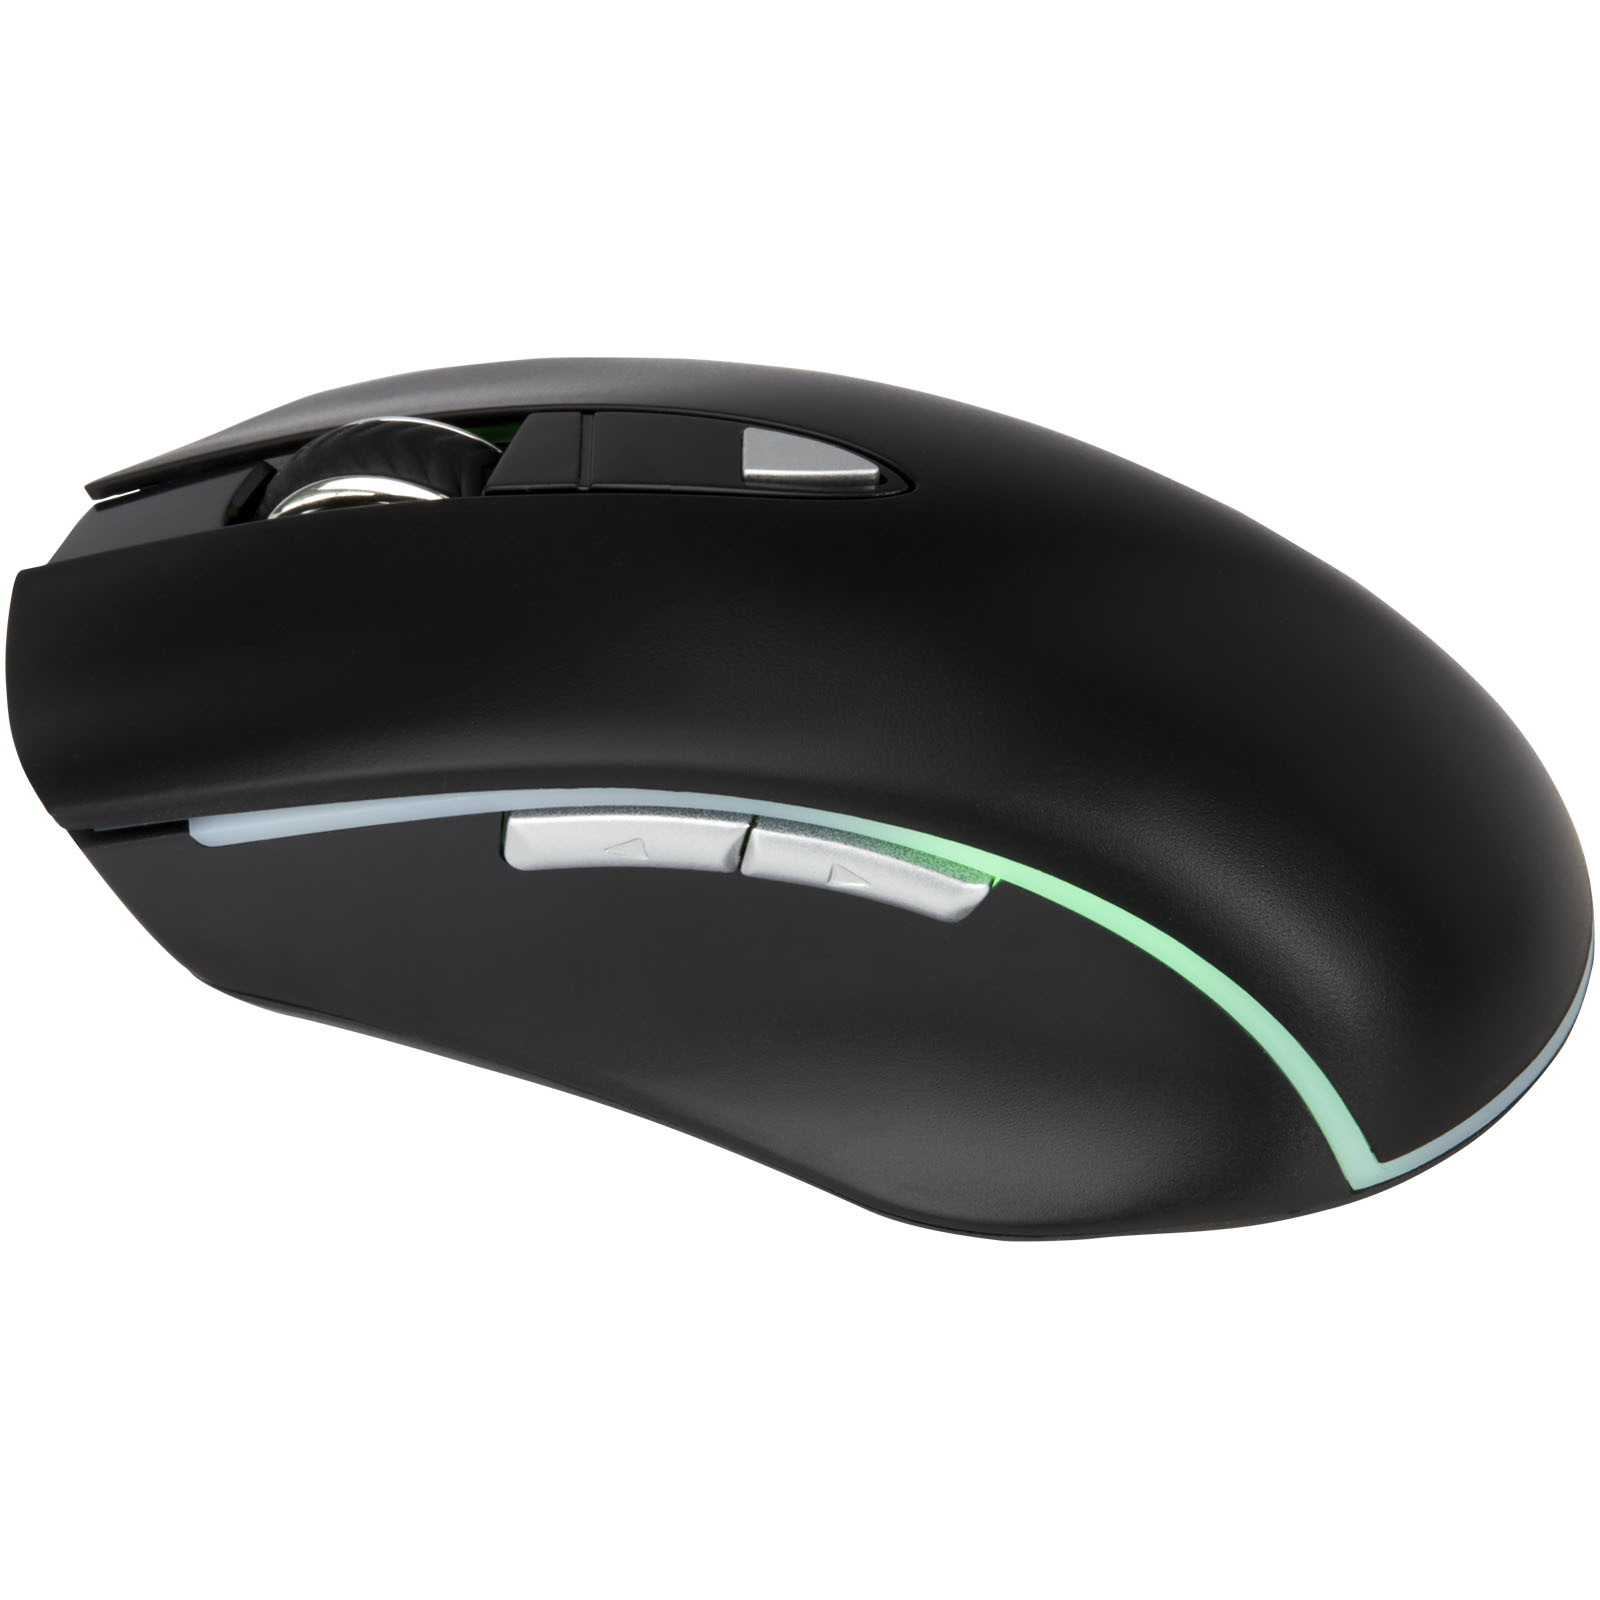 Advertising Computer Accessories - Gleam light-up mouse - 0